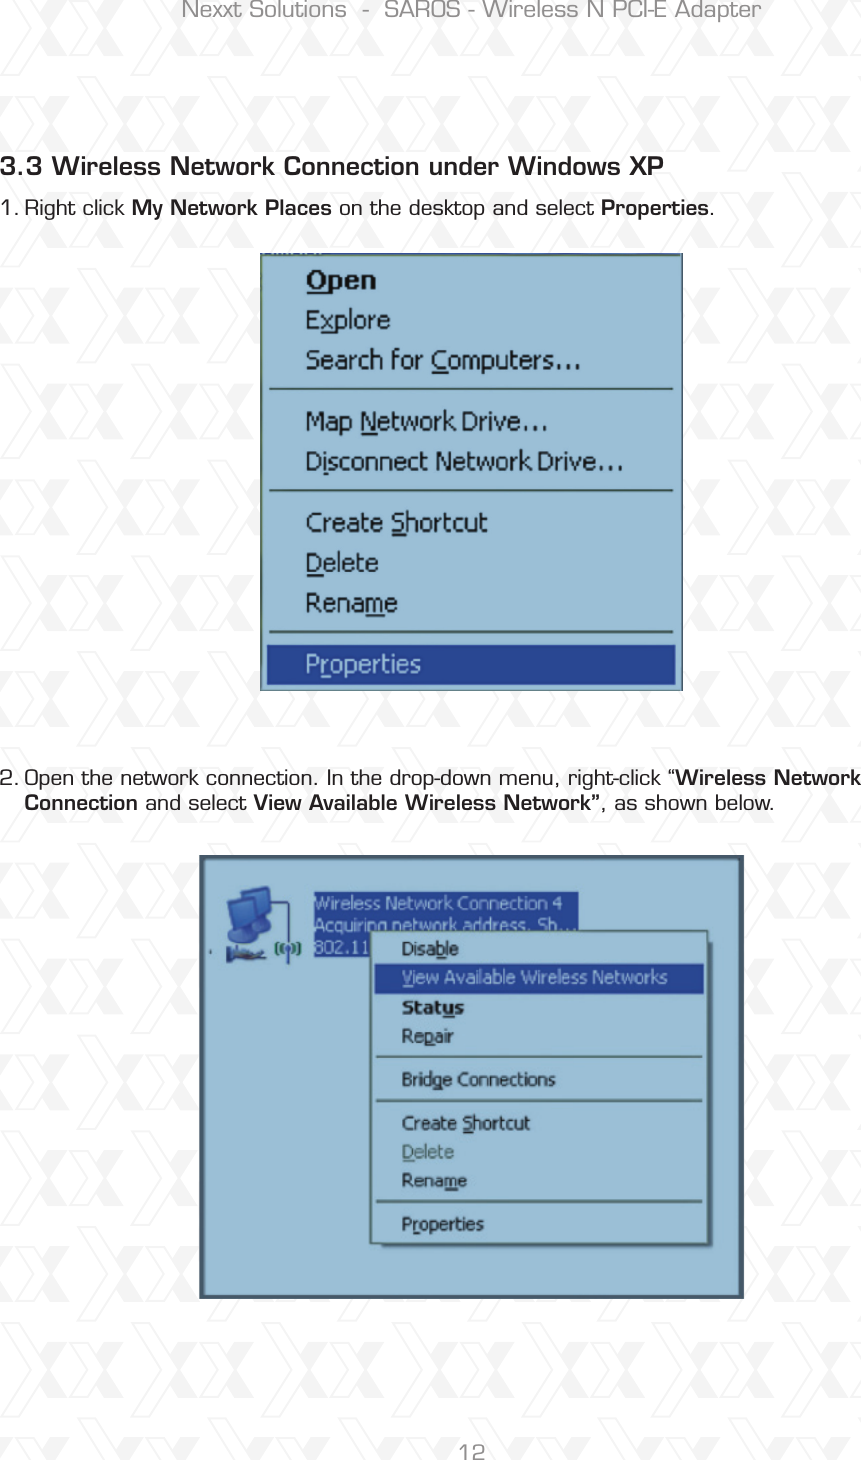 Nexxt Solutions  -  SAROS - Wireless N PCI-E Adapter123.3 Wireless Network Connection under Windows XP Right click My Network Places on the desktop and select Properties.Open the network connection. In the drop-down menu, right-click “Wireless NetworkConnection and select View Available Wireless Network”, as shown below.1.2.